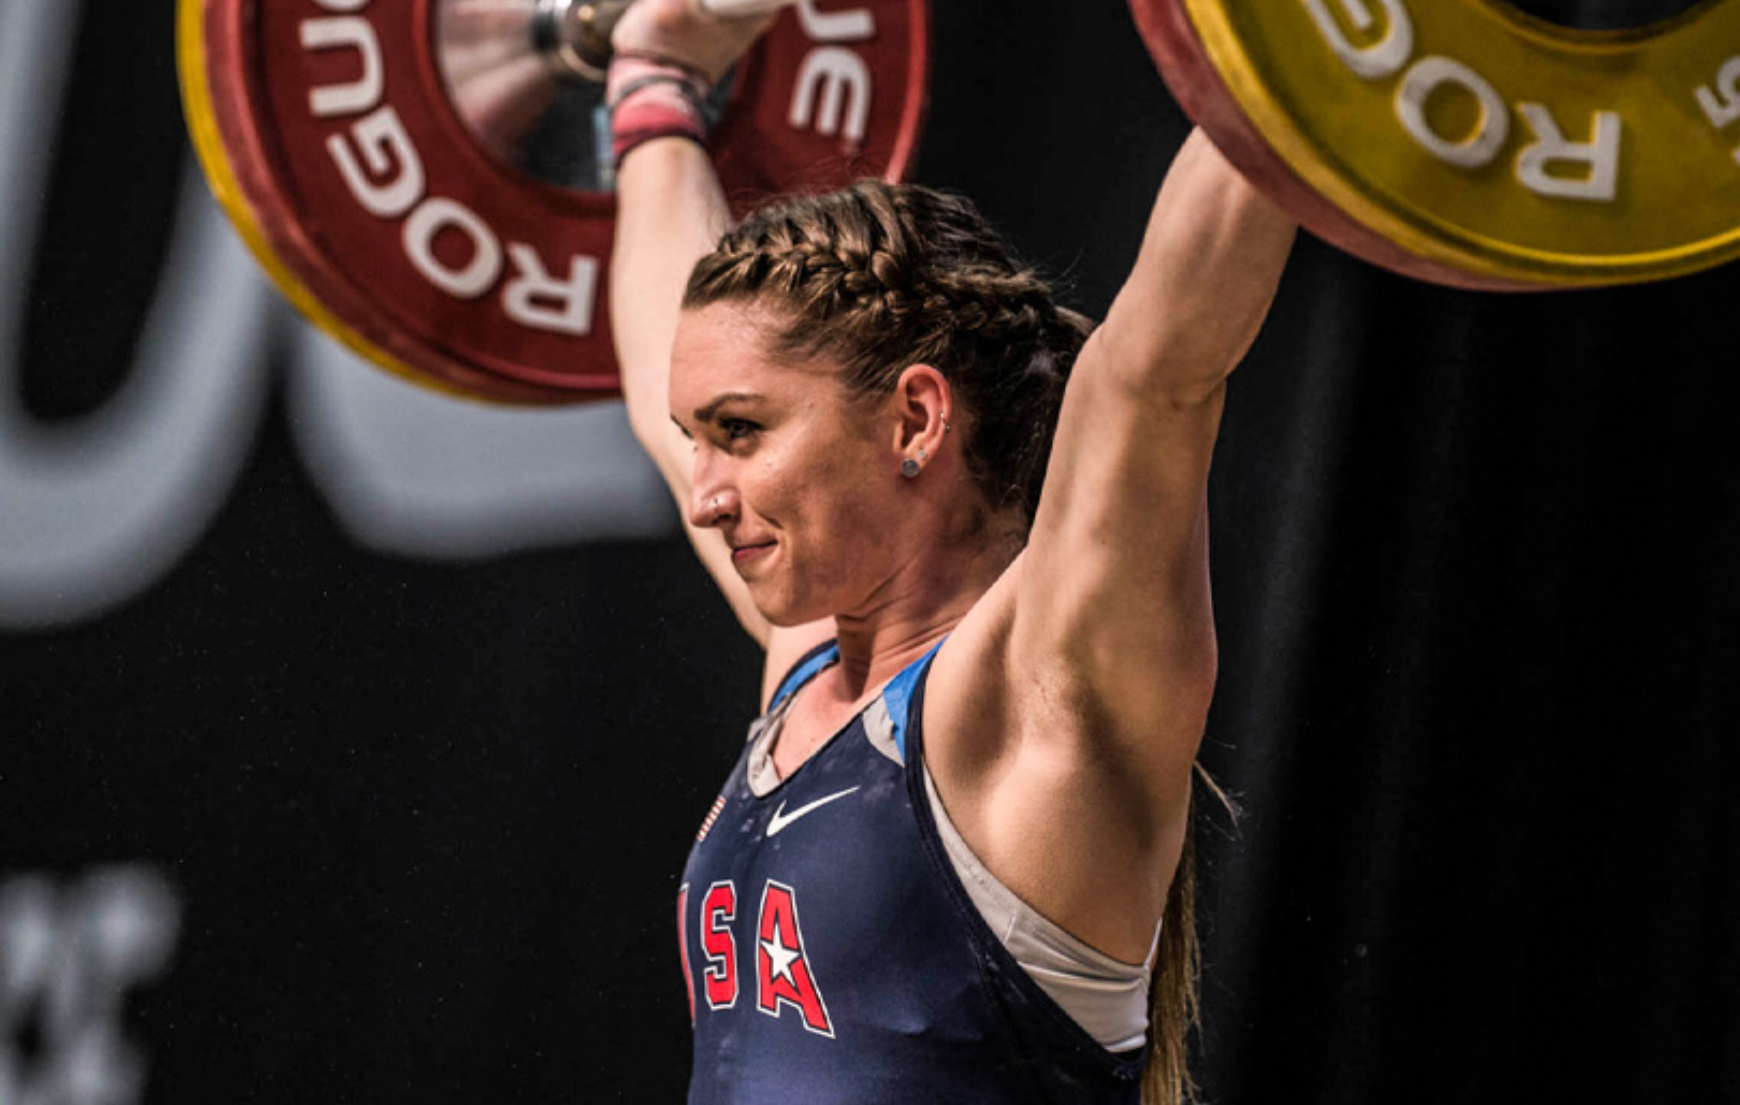 Who is USA Weightlifter Mattie Rogers? Olympic Athlete and Social Media Star